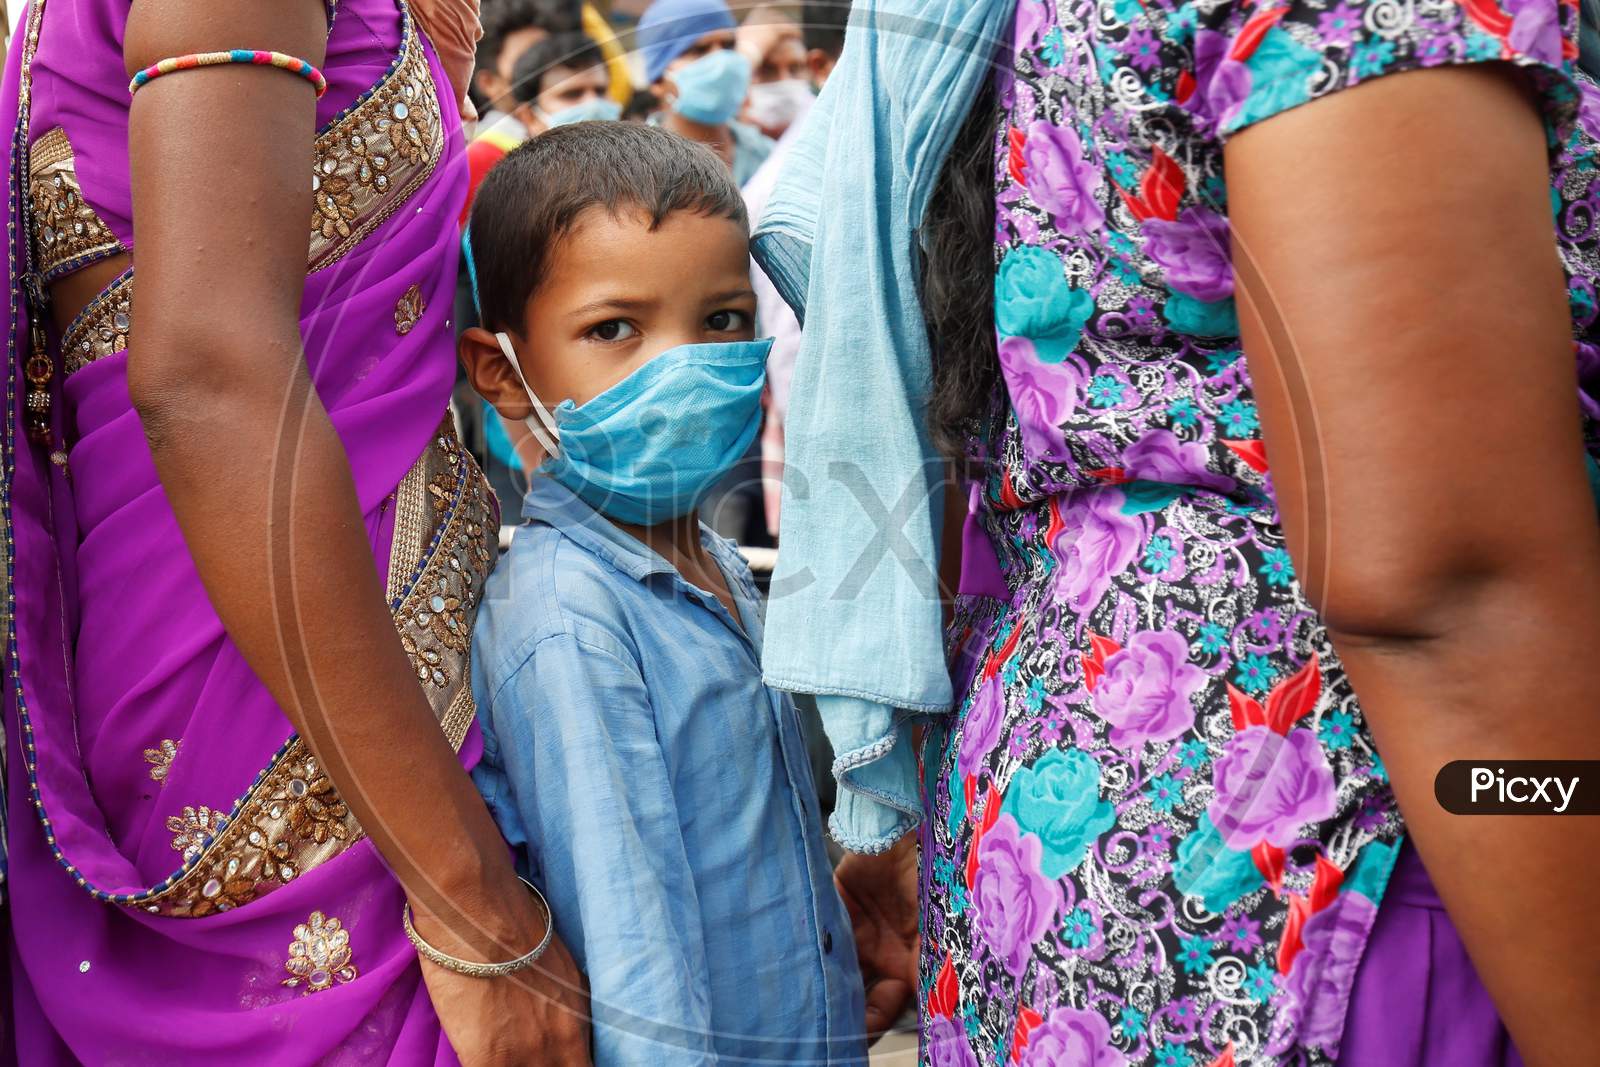 A boy waits for a health screening before boarding a bus to be taken to a government-arranged train to his destination after the state eased lockdown regulations during the extended nationwide lockdown to prevent the spread of coronavirus (Covid-19) in Bangalore, India.